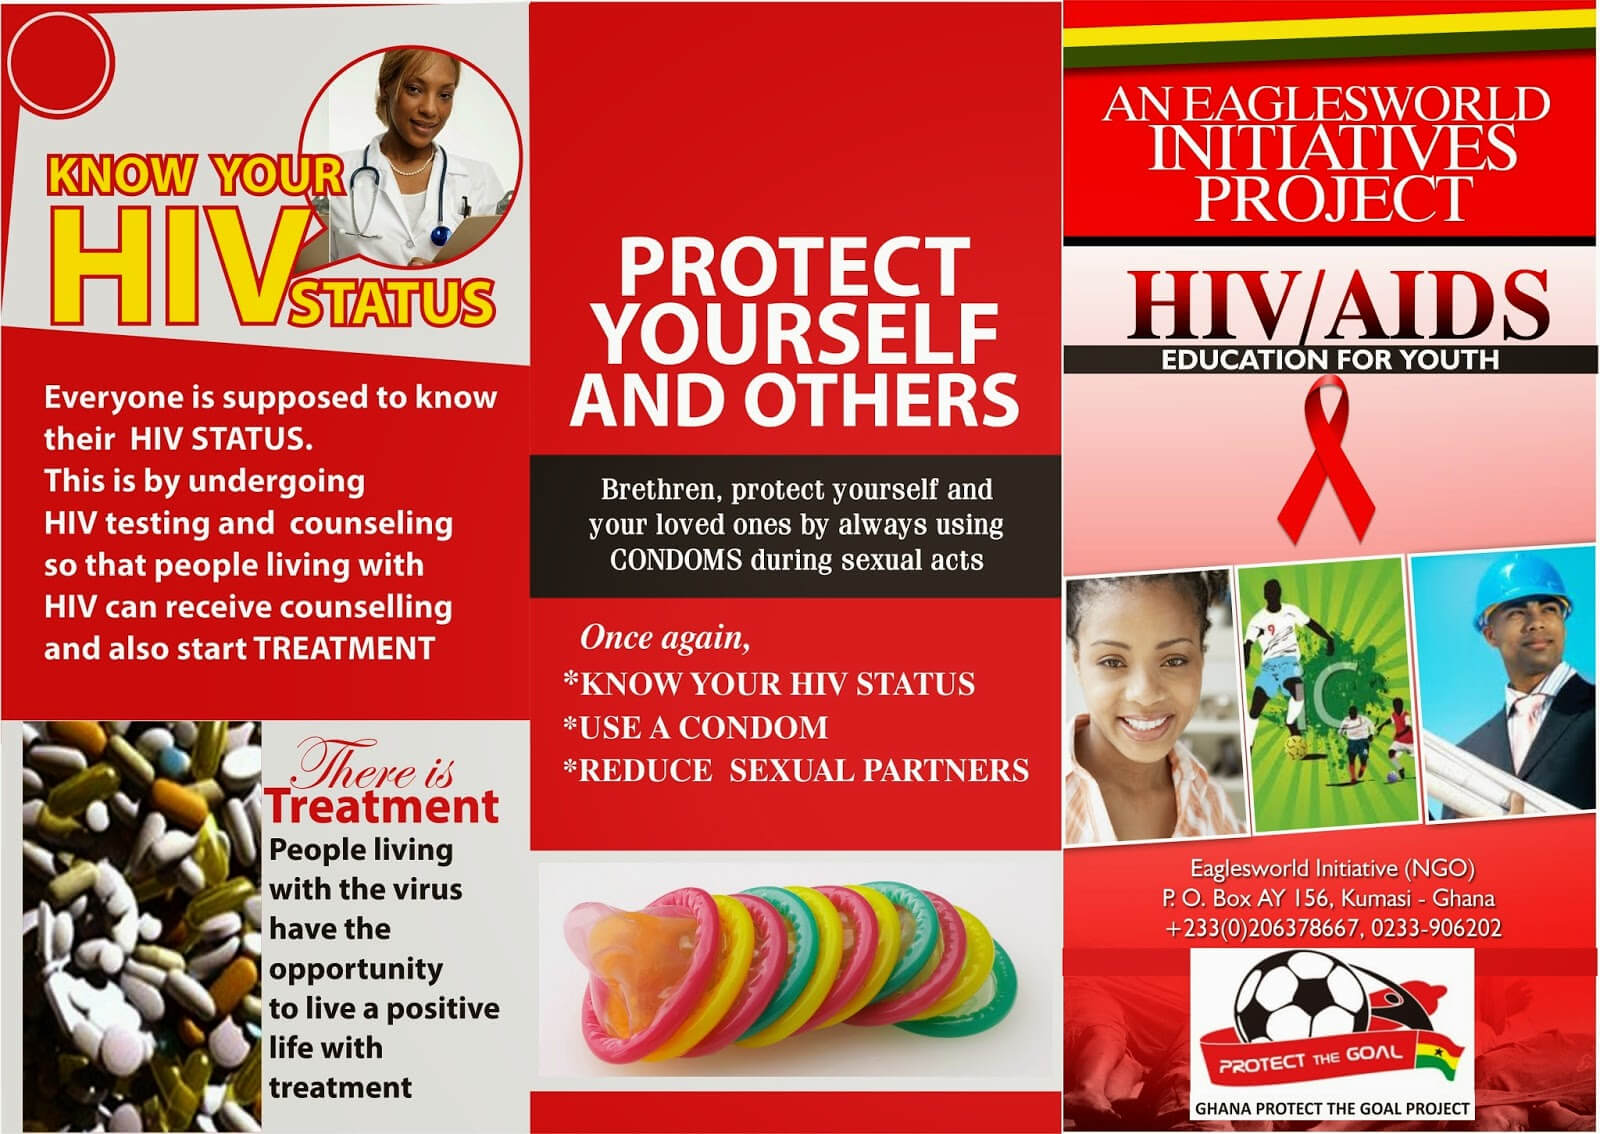 8 Best Photos Of Hiv Brochure Template - Hiv Aids Brochure Regarding Hiv Aids Brochure Templates